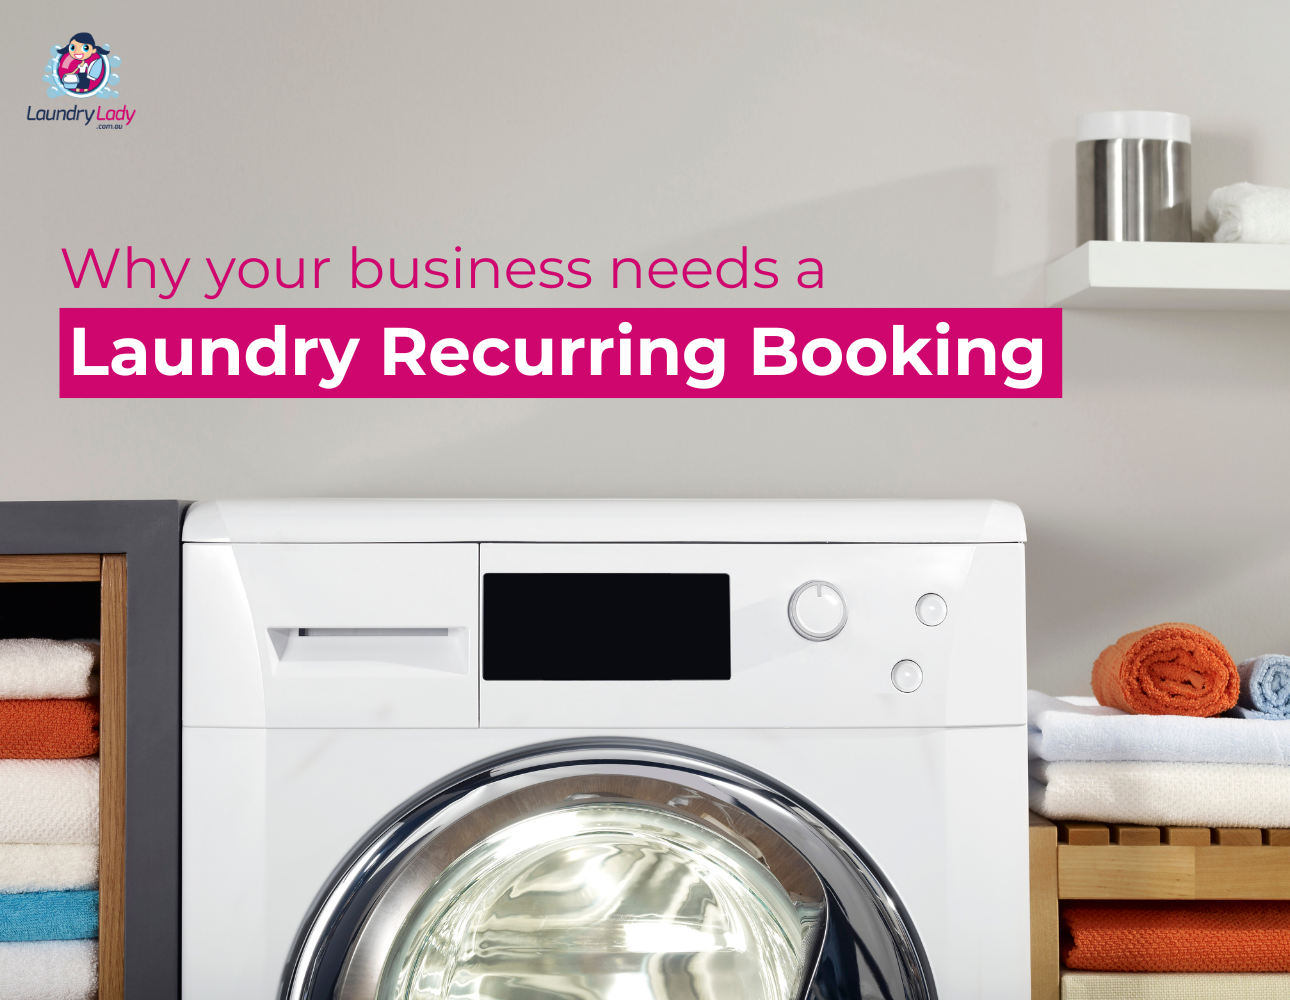 Laundry Recurring Bookings - The Laundry Lady - Pickup and delivery laundry service Australia wide